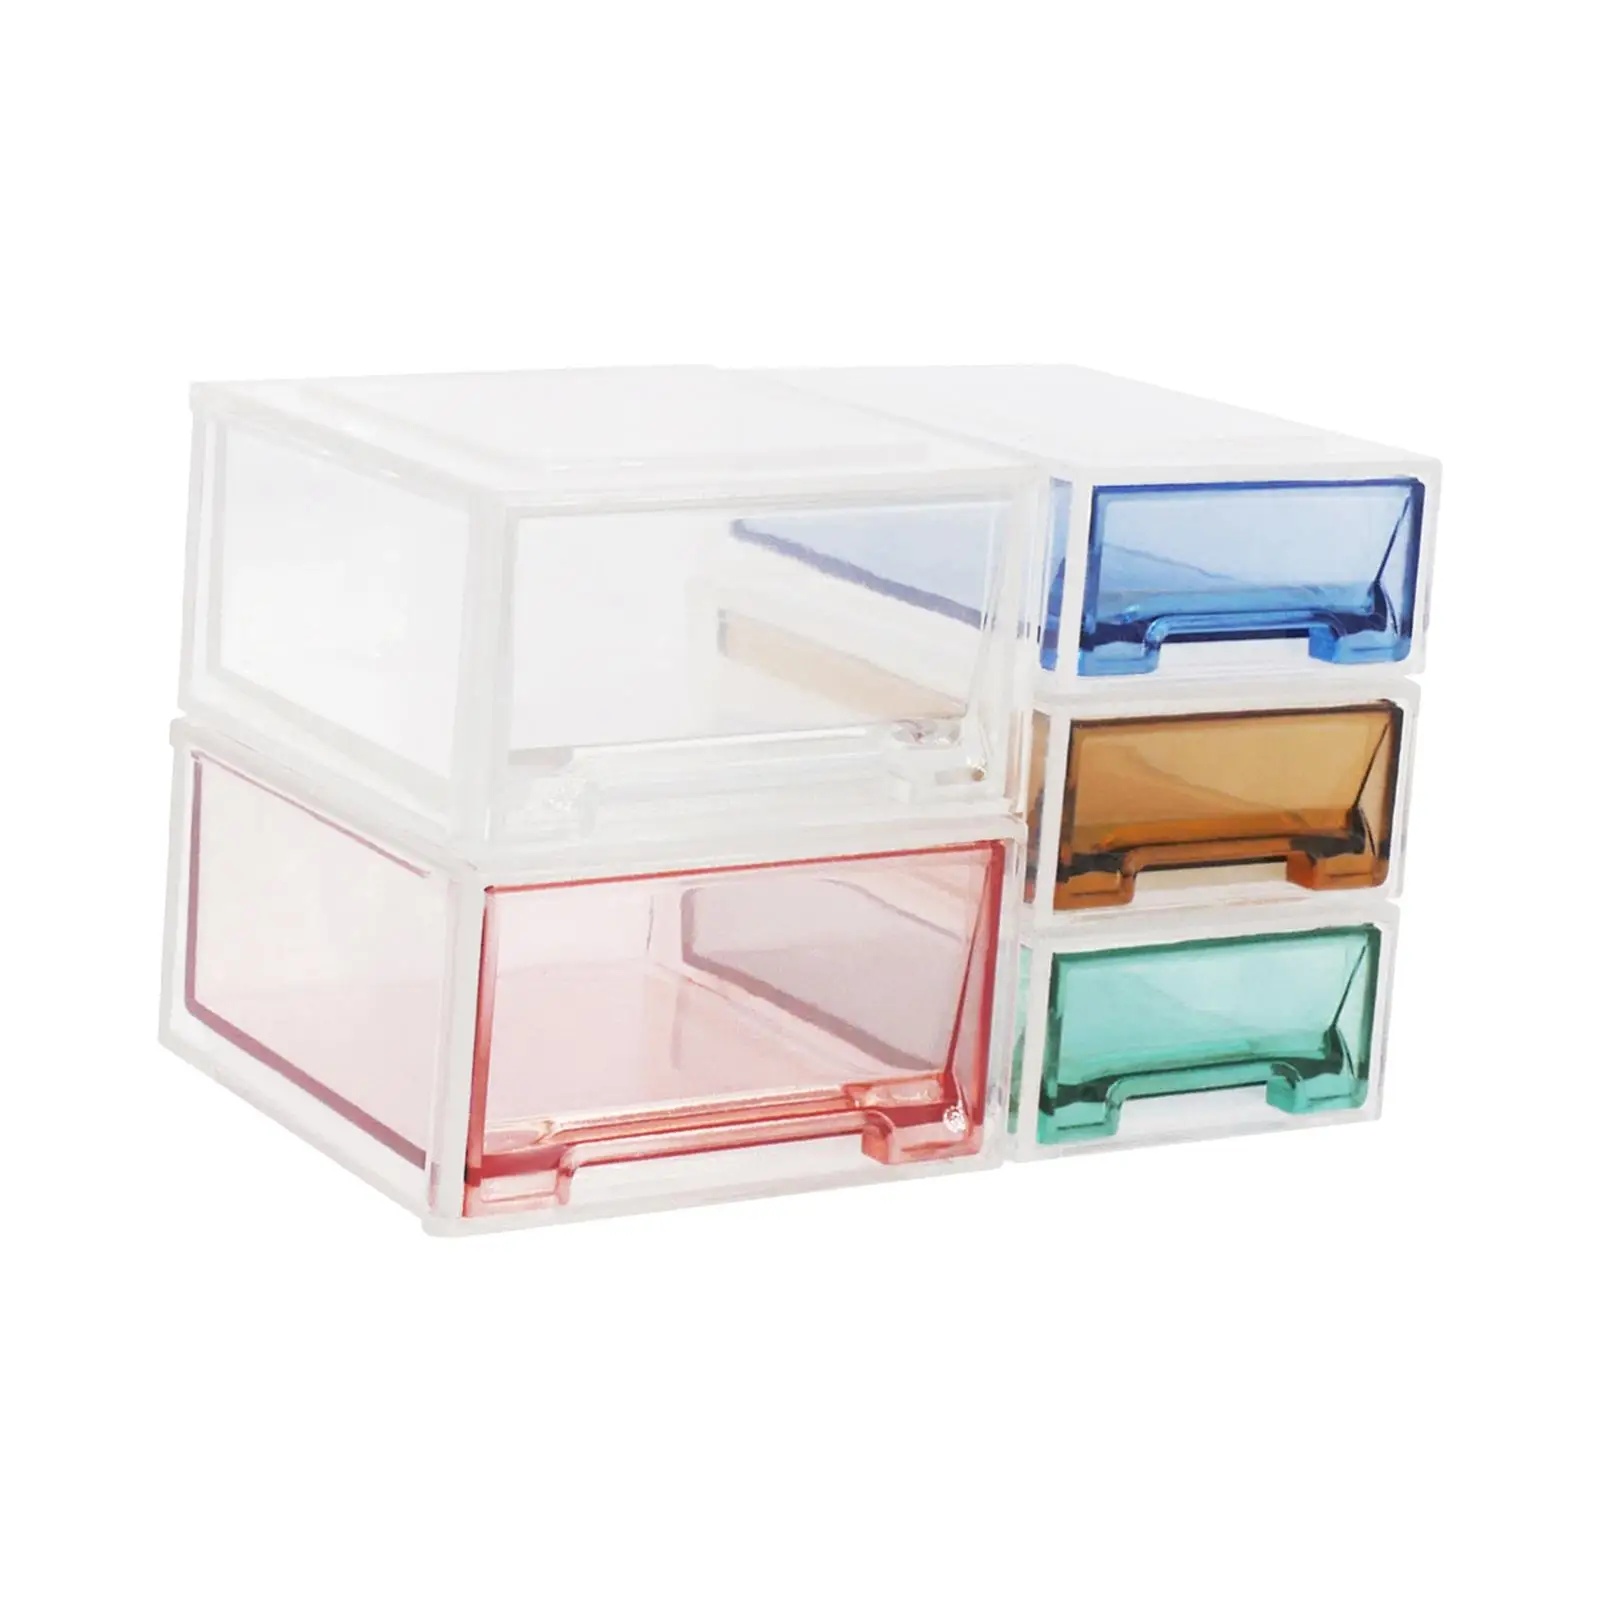 5Pcs Miniature 6 Dollhouse Storage Box Stackable Toy Box for Dolls Bedroom